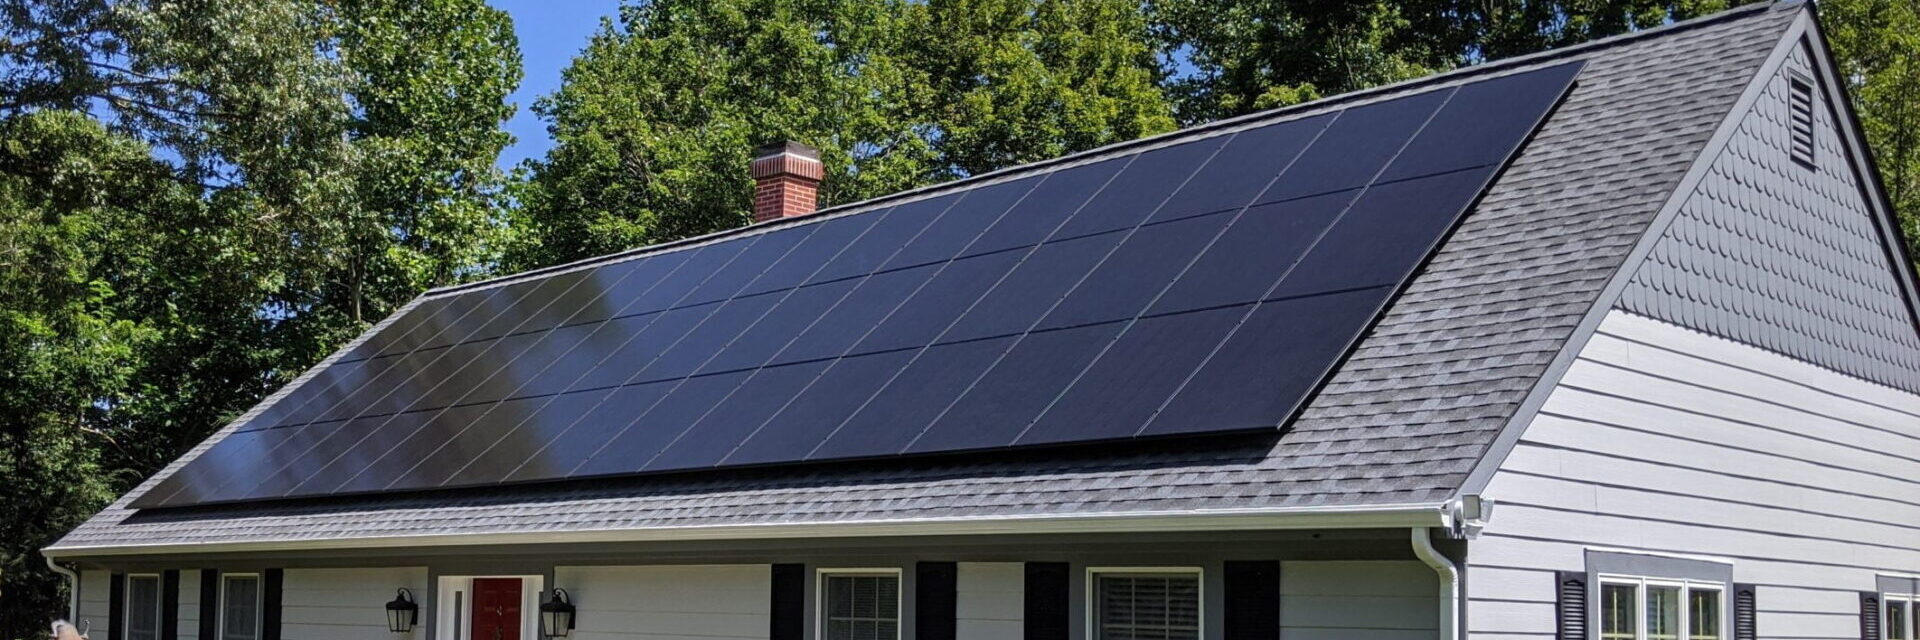 Black solar panels installed on Madison County Virginia home roof